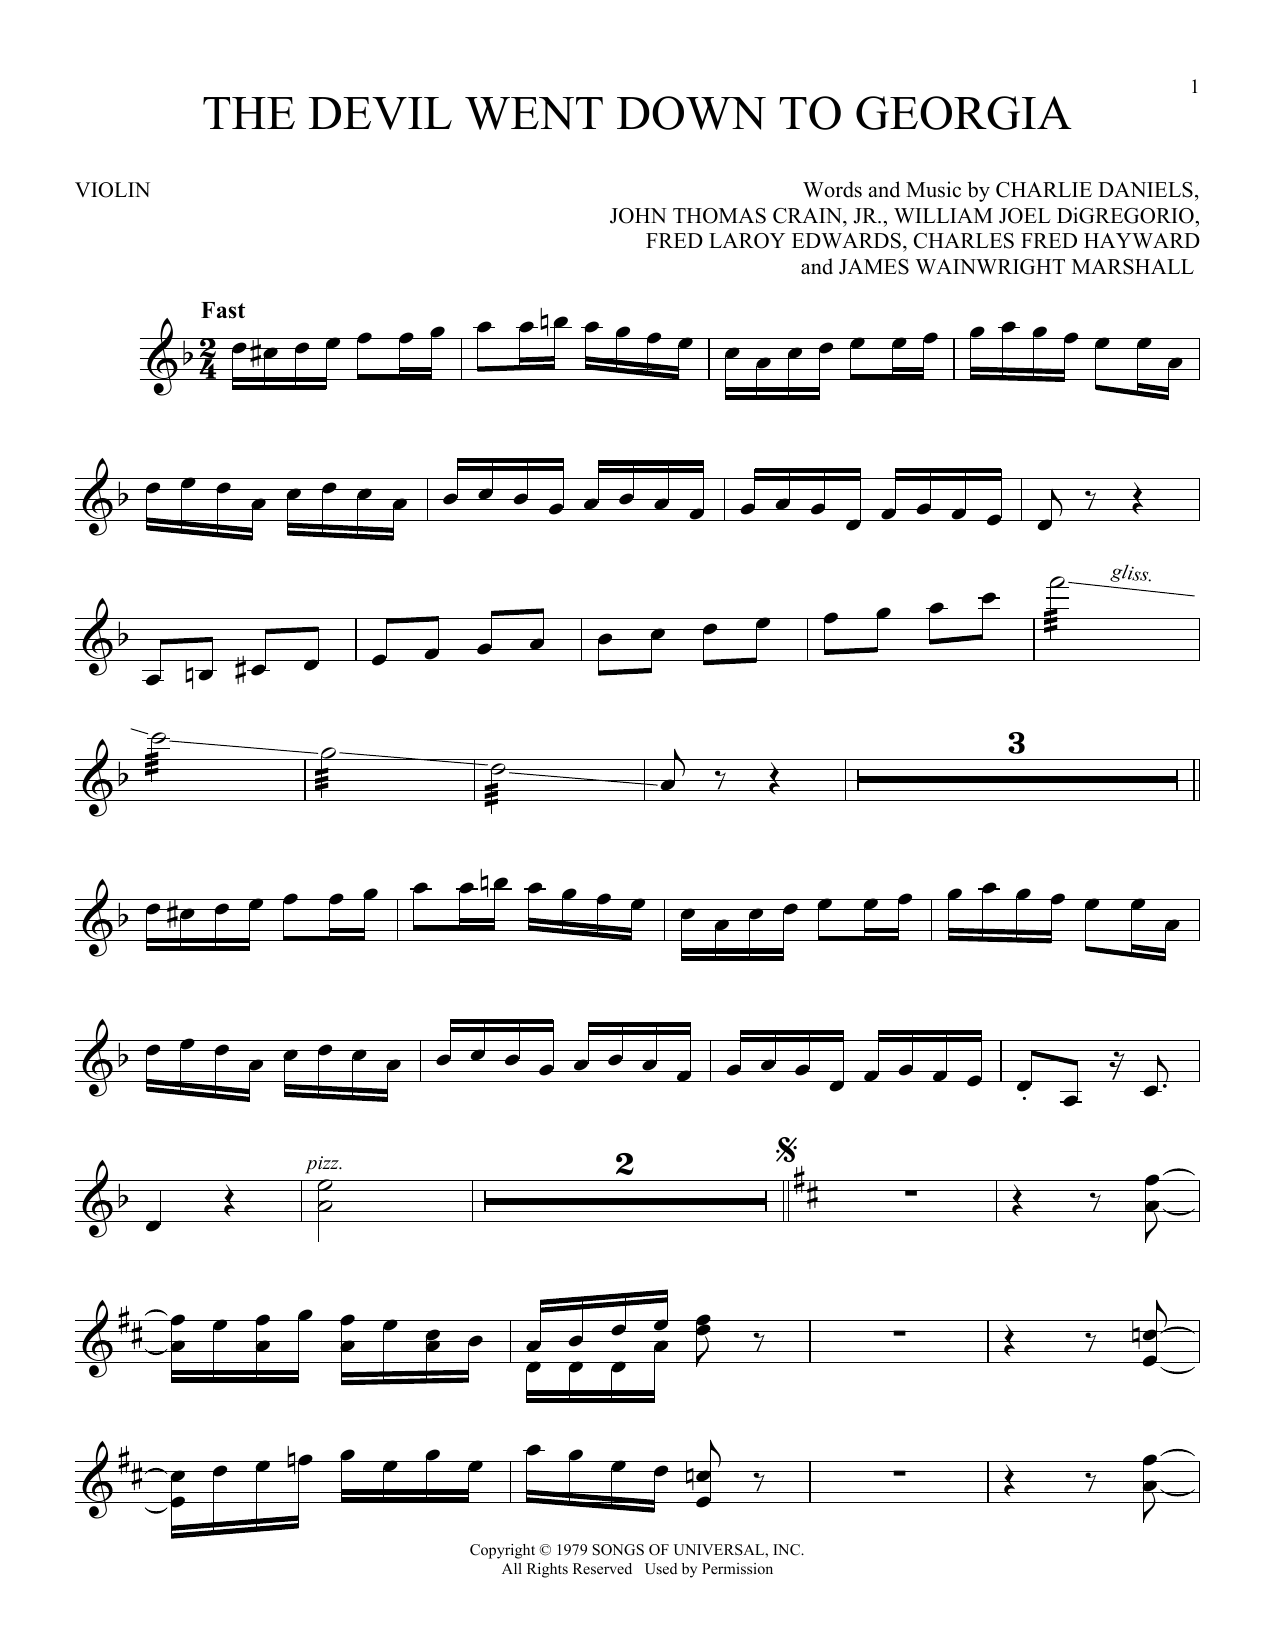 Download Charlie Daniels Band The Devil Went Down To Georgia Sheet Music